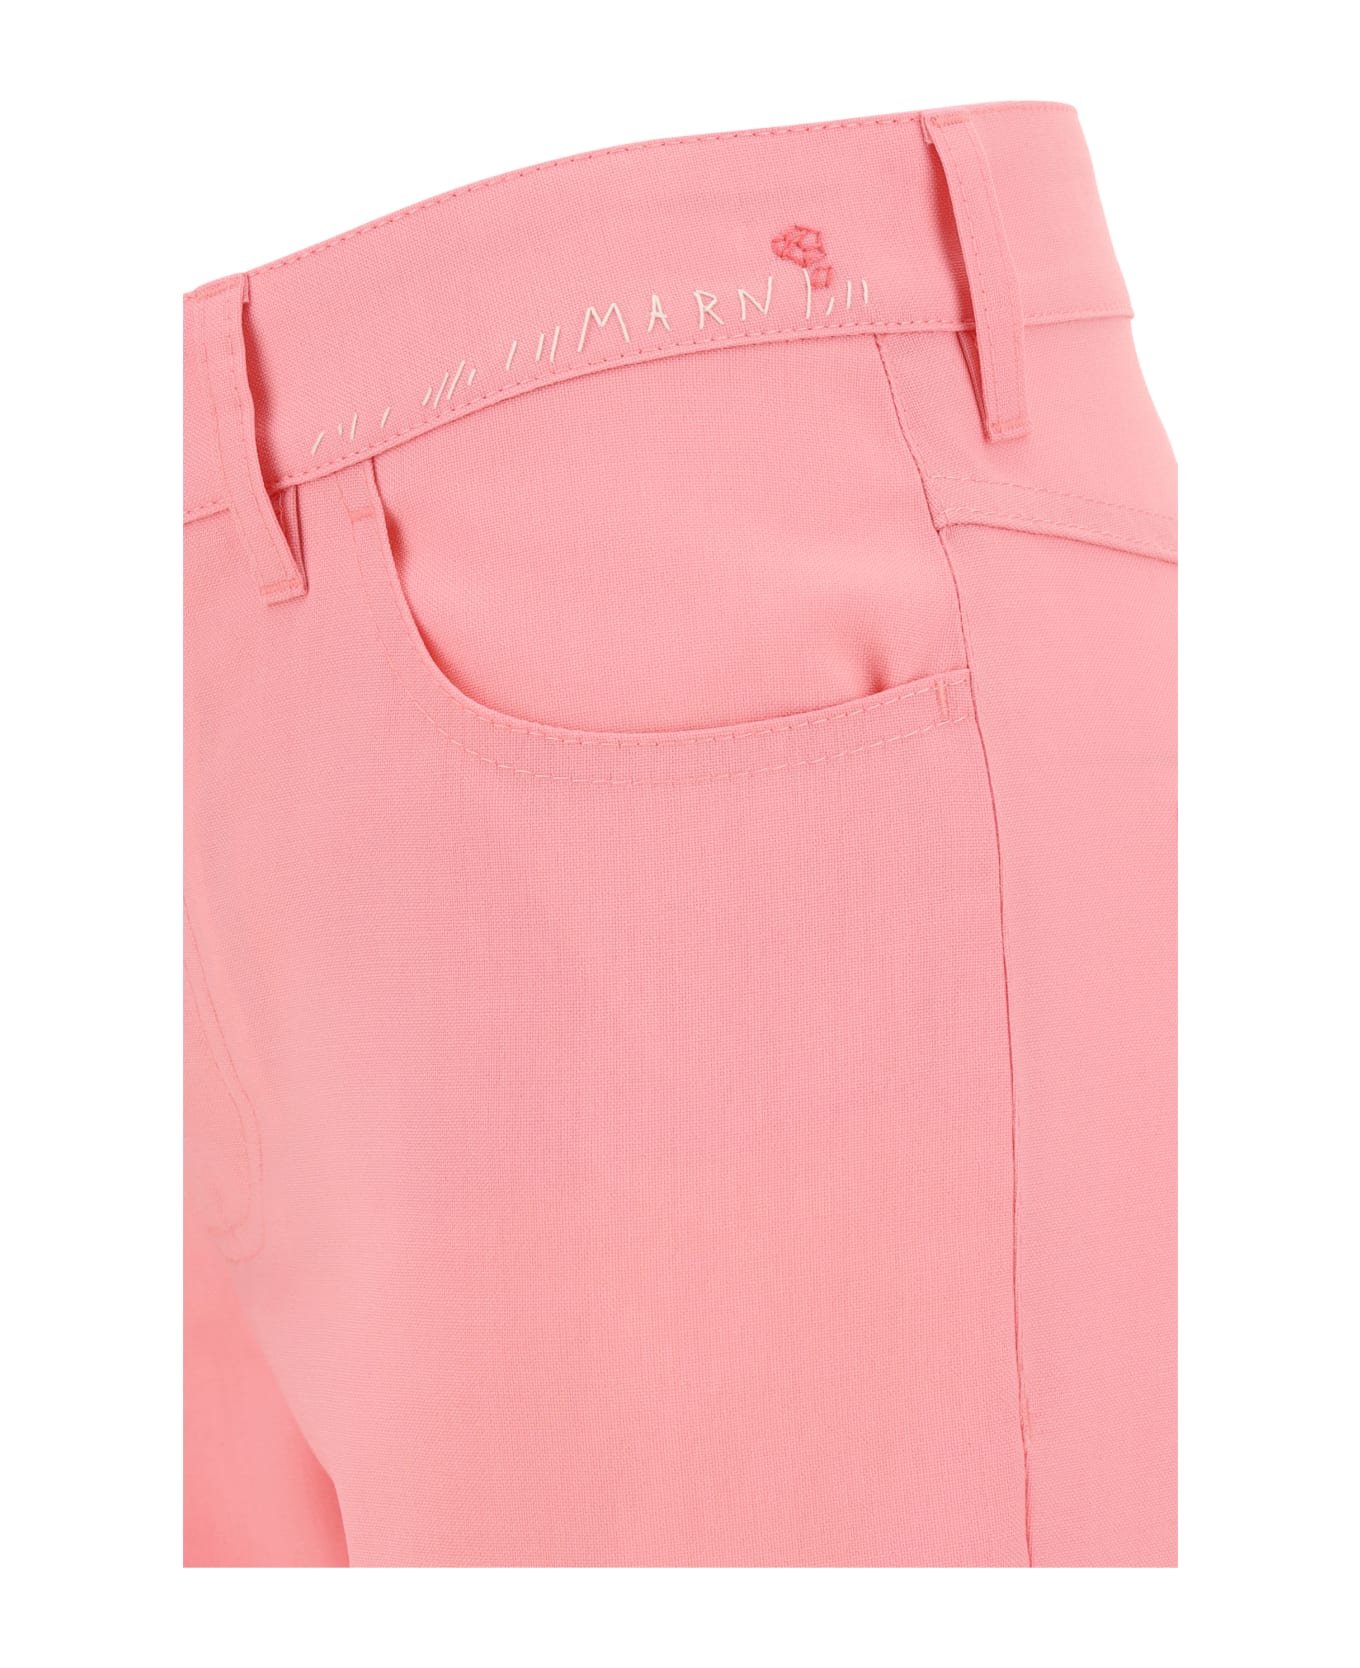 Marni Trousers - Pink Gummy